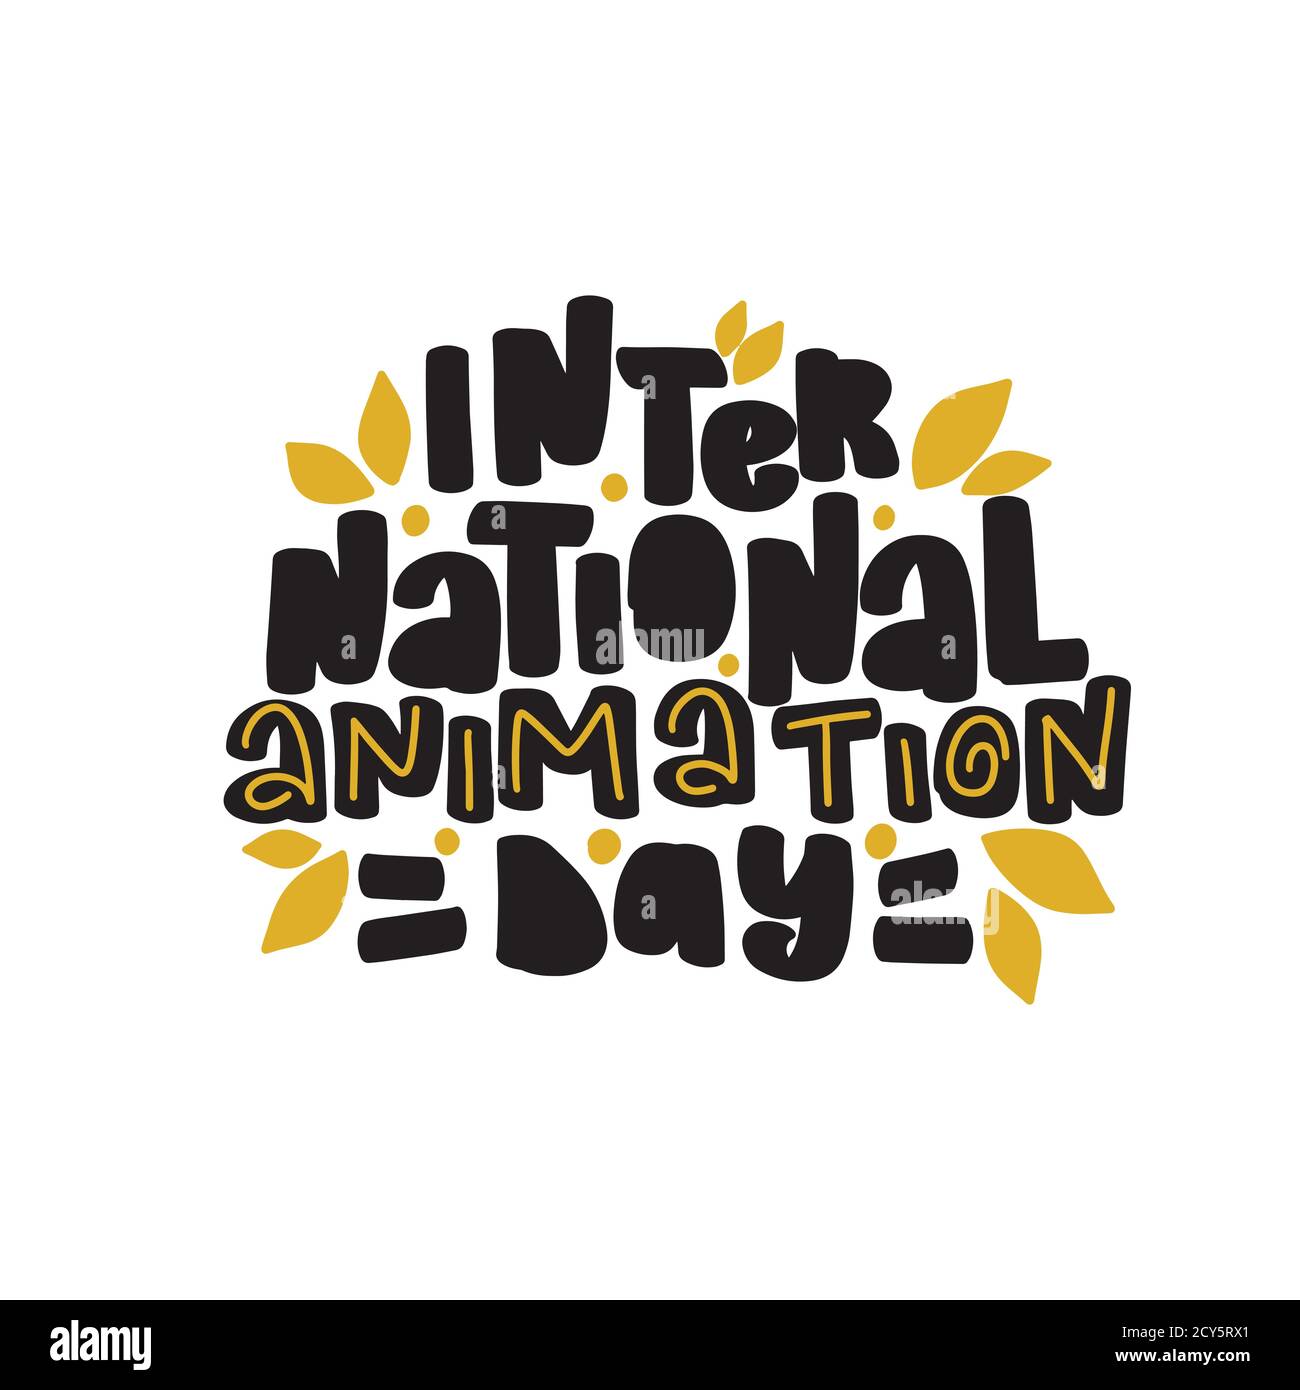 International Animation Day. Hand drawn lettering brush calligraphy Stock Vector